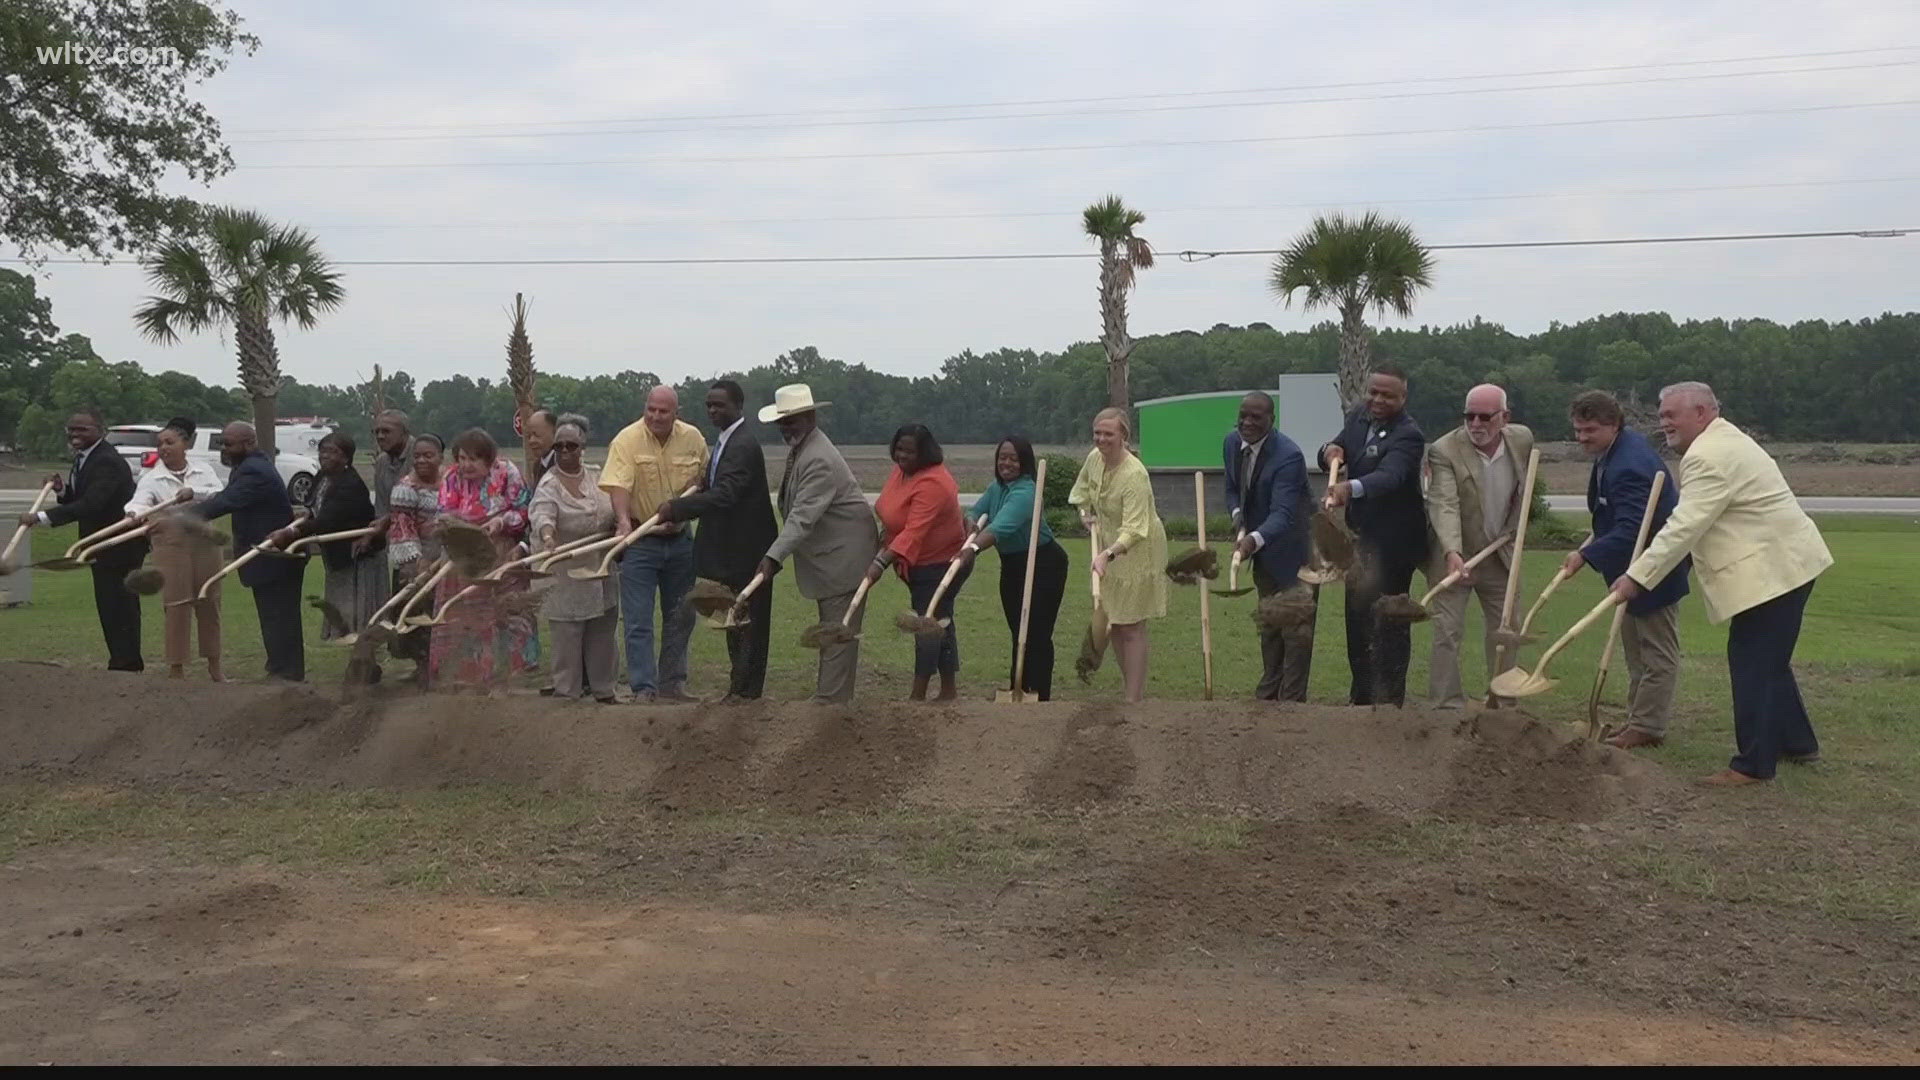 The county had a groundbreaking for their broadband expansion project.